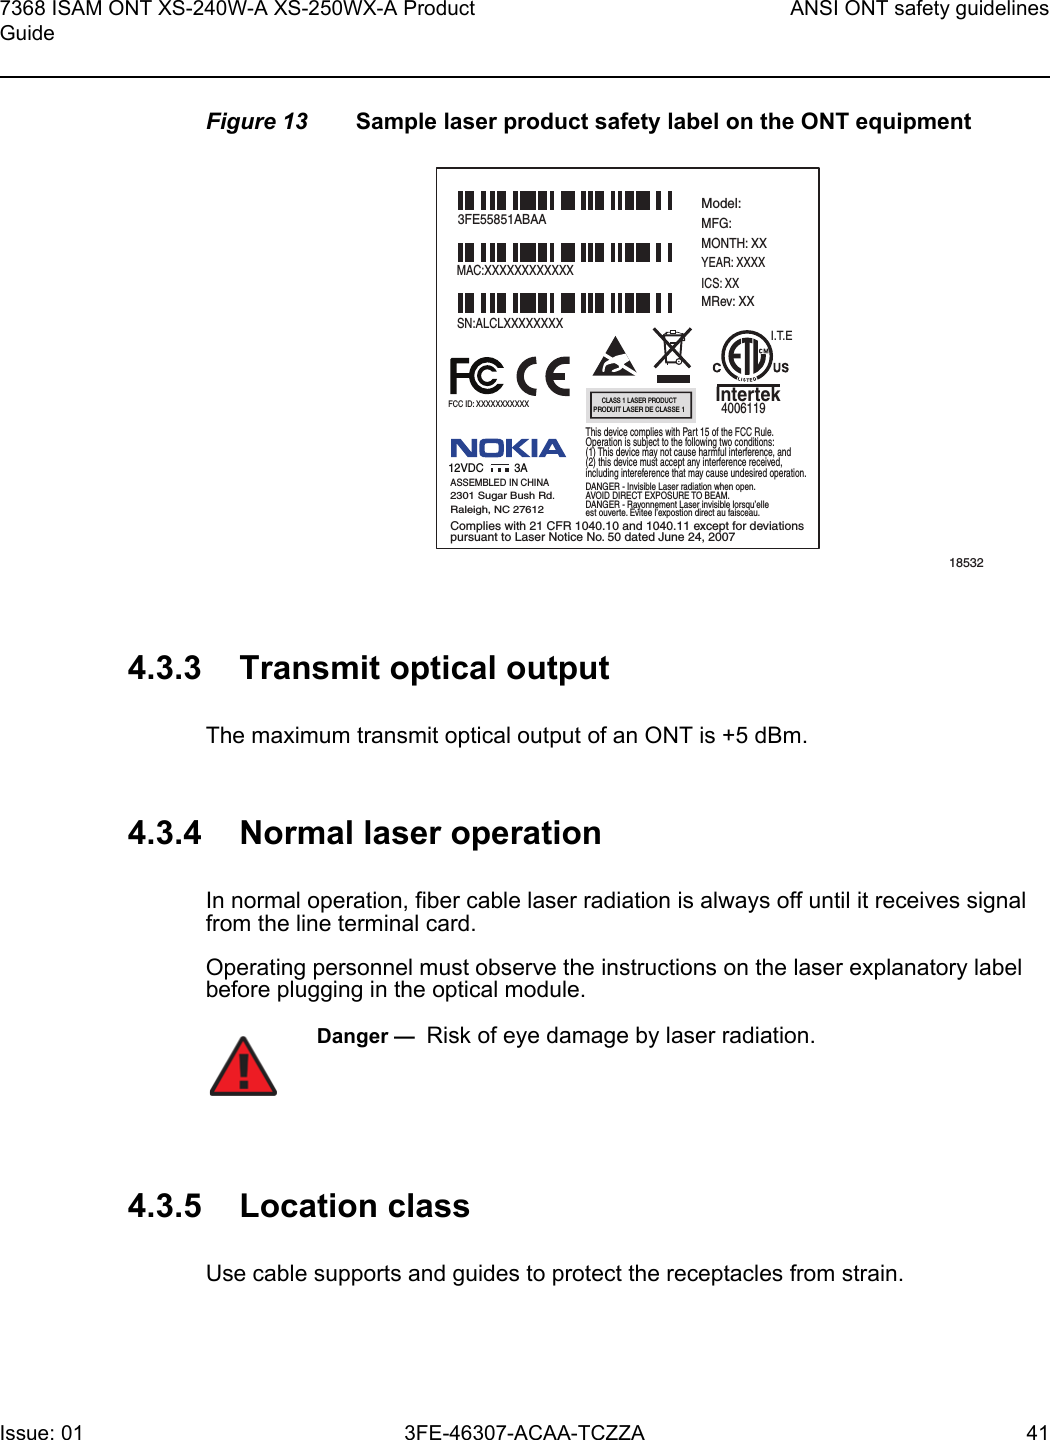 7368 ISAM ONT XS-240W-A XS-250WX-A Product GuideANSI ONT safety guidelinesIssue: 01 3FE-46307-ACAA-TCZZA 41 Figure 13 Sample laser product safety label on the ONT equipment4.3.3 Transmit optical outputThe maximum transmit optical output of an ONT is +5 dBm.4.3.4 Normal laser operationIn normal operation, fiber cable laser radiation is always off until it receives signal from the line terminal card.Operating personnel must observe the instructions on the laser explanatory label before plugging in the optical module.4.3.5 Location classUse cable supports and guides to protect the receptacles from strain.185323FE55851ABAAModel:MFG:MONTH: XXYEAR: XXXXICS: XXMRev: XX MAC:XXXXXXXXXXXXSN:ALCLXXXXXXXXFCC ID: XXXXXXXXXXXThis device complies with Part 15 of the FCC Rule.Operation is subject to the following two conditions:(1) This device may not cause harmful interference, and(2) this device must accept any interference received,including intereference that may cause undesired operation. ASSEMBLED IN CHINA2301 Sugar Bush Rd.Raleigh, NC 27612DANGER - Invisible Laser radiation when open.AVOID DIRECT EXPOSURE TO BEAM.DANGER - Rayonnement Laser invisible lorsqu’elleest ouverte. Evitee l’expostion direct au faisceau.Complies with 21 CFR 1040.10 and 1040.11 except for deviationspursuant to Laser Notice No. 50 dated June 24, 200712VDC 3AI.T.EIntertek4006119CLASS 1 LASER PRODUCTPRODUIT LASER DE CLASSE 1Danger —  Risk of eye damage by laser radiation.